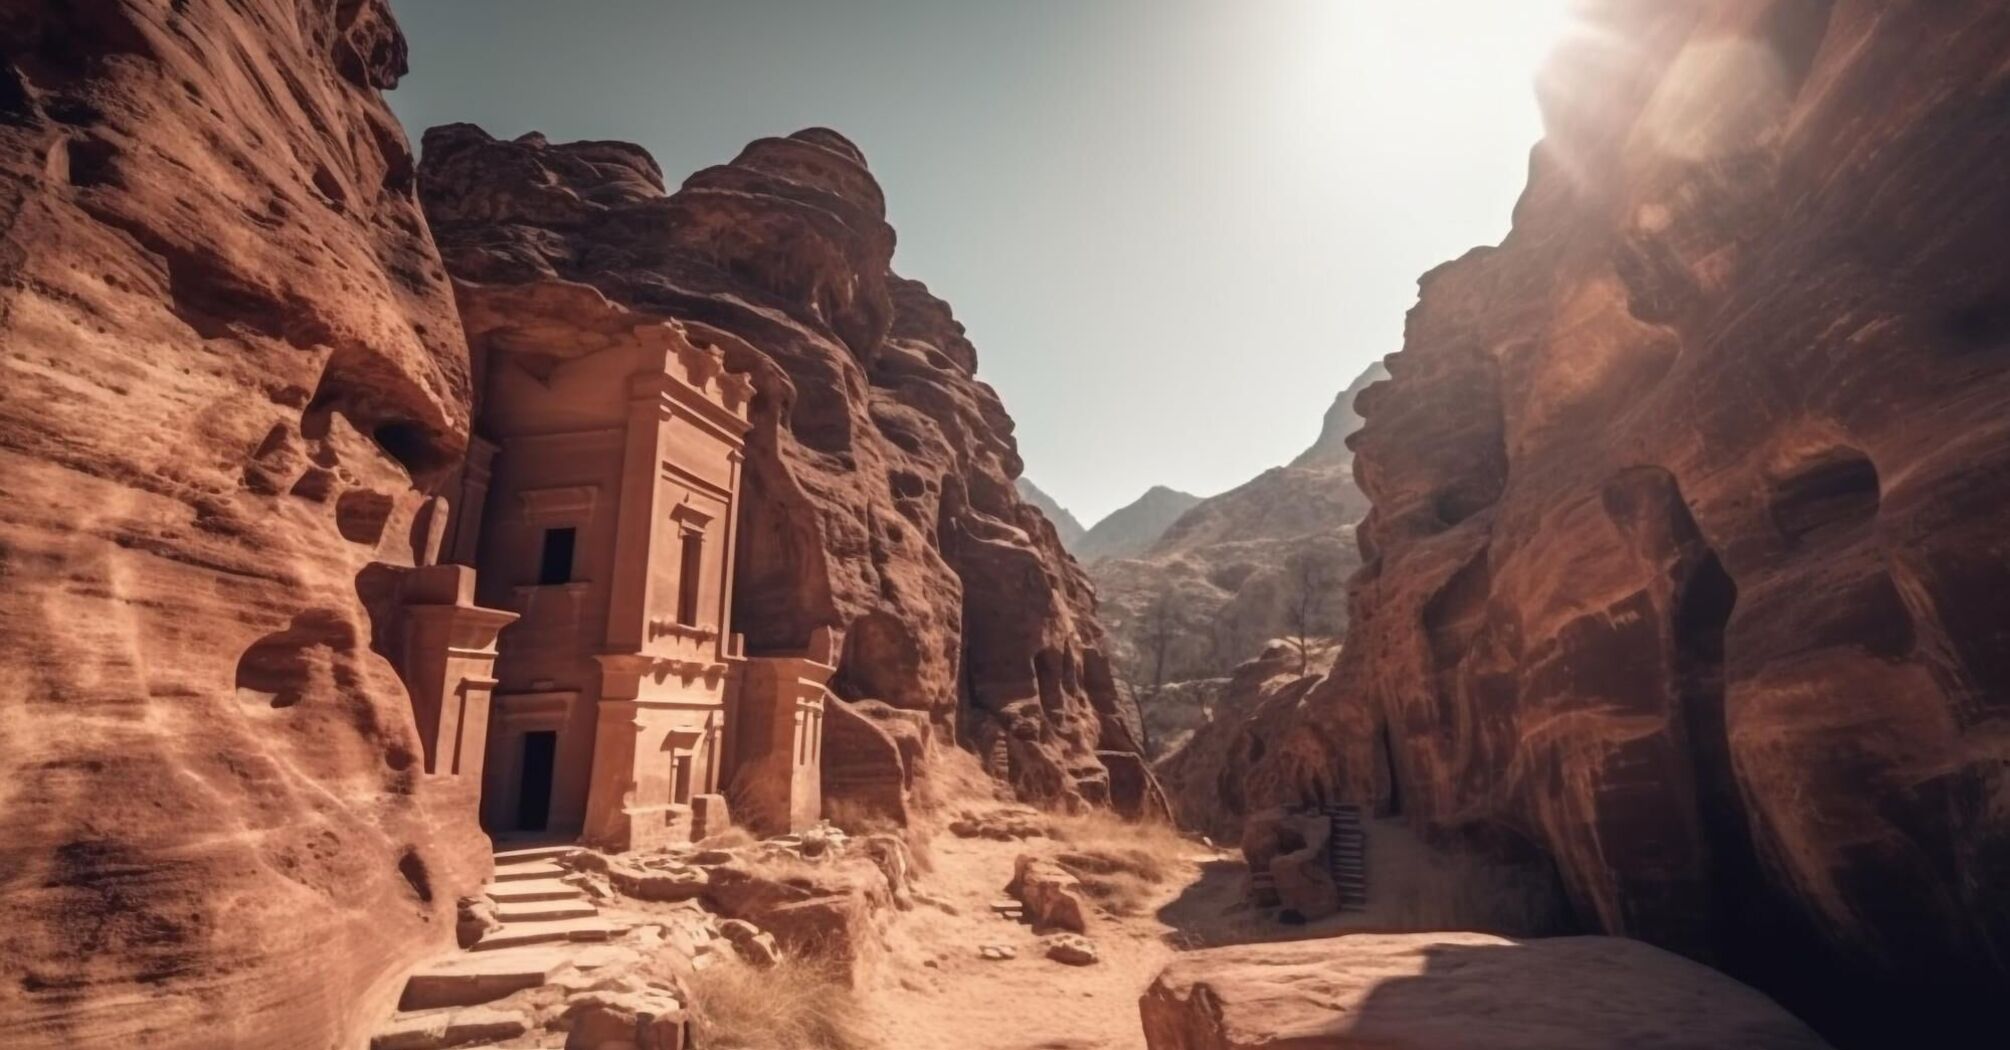 In search of adventure: Ancient ruins you'll want to discover